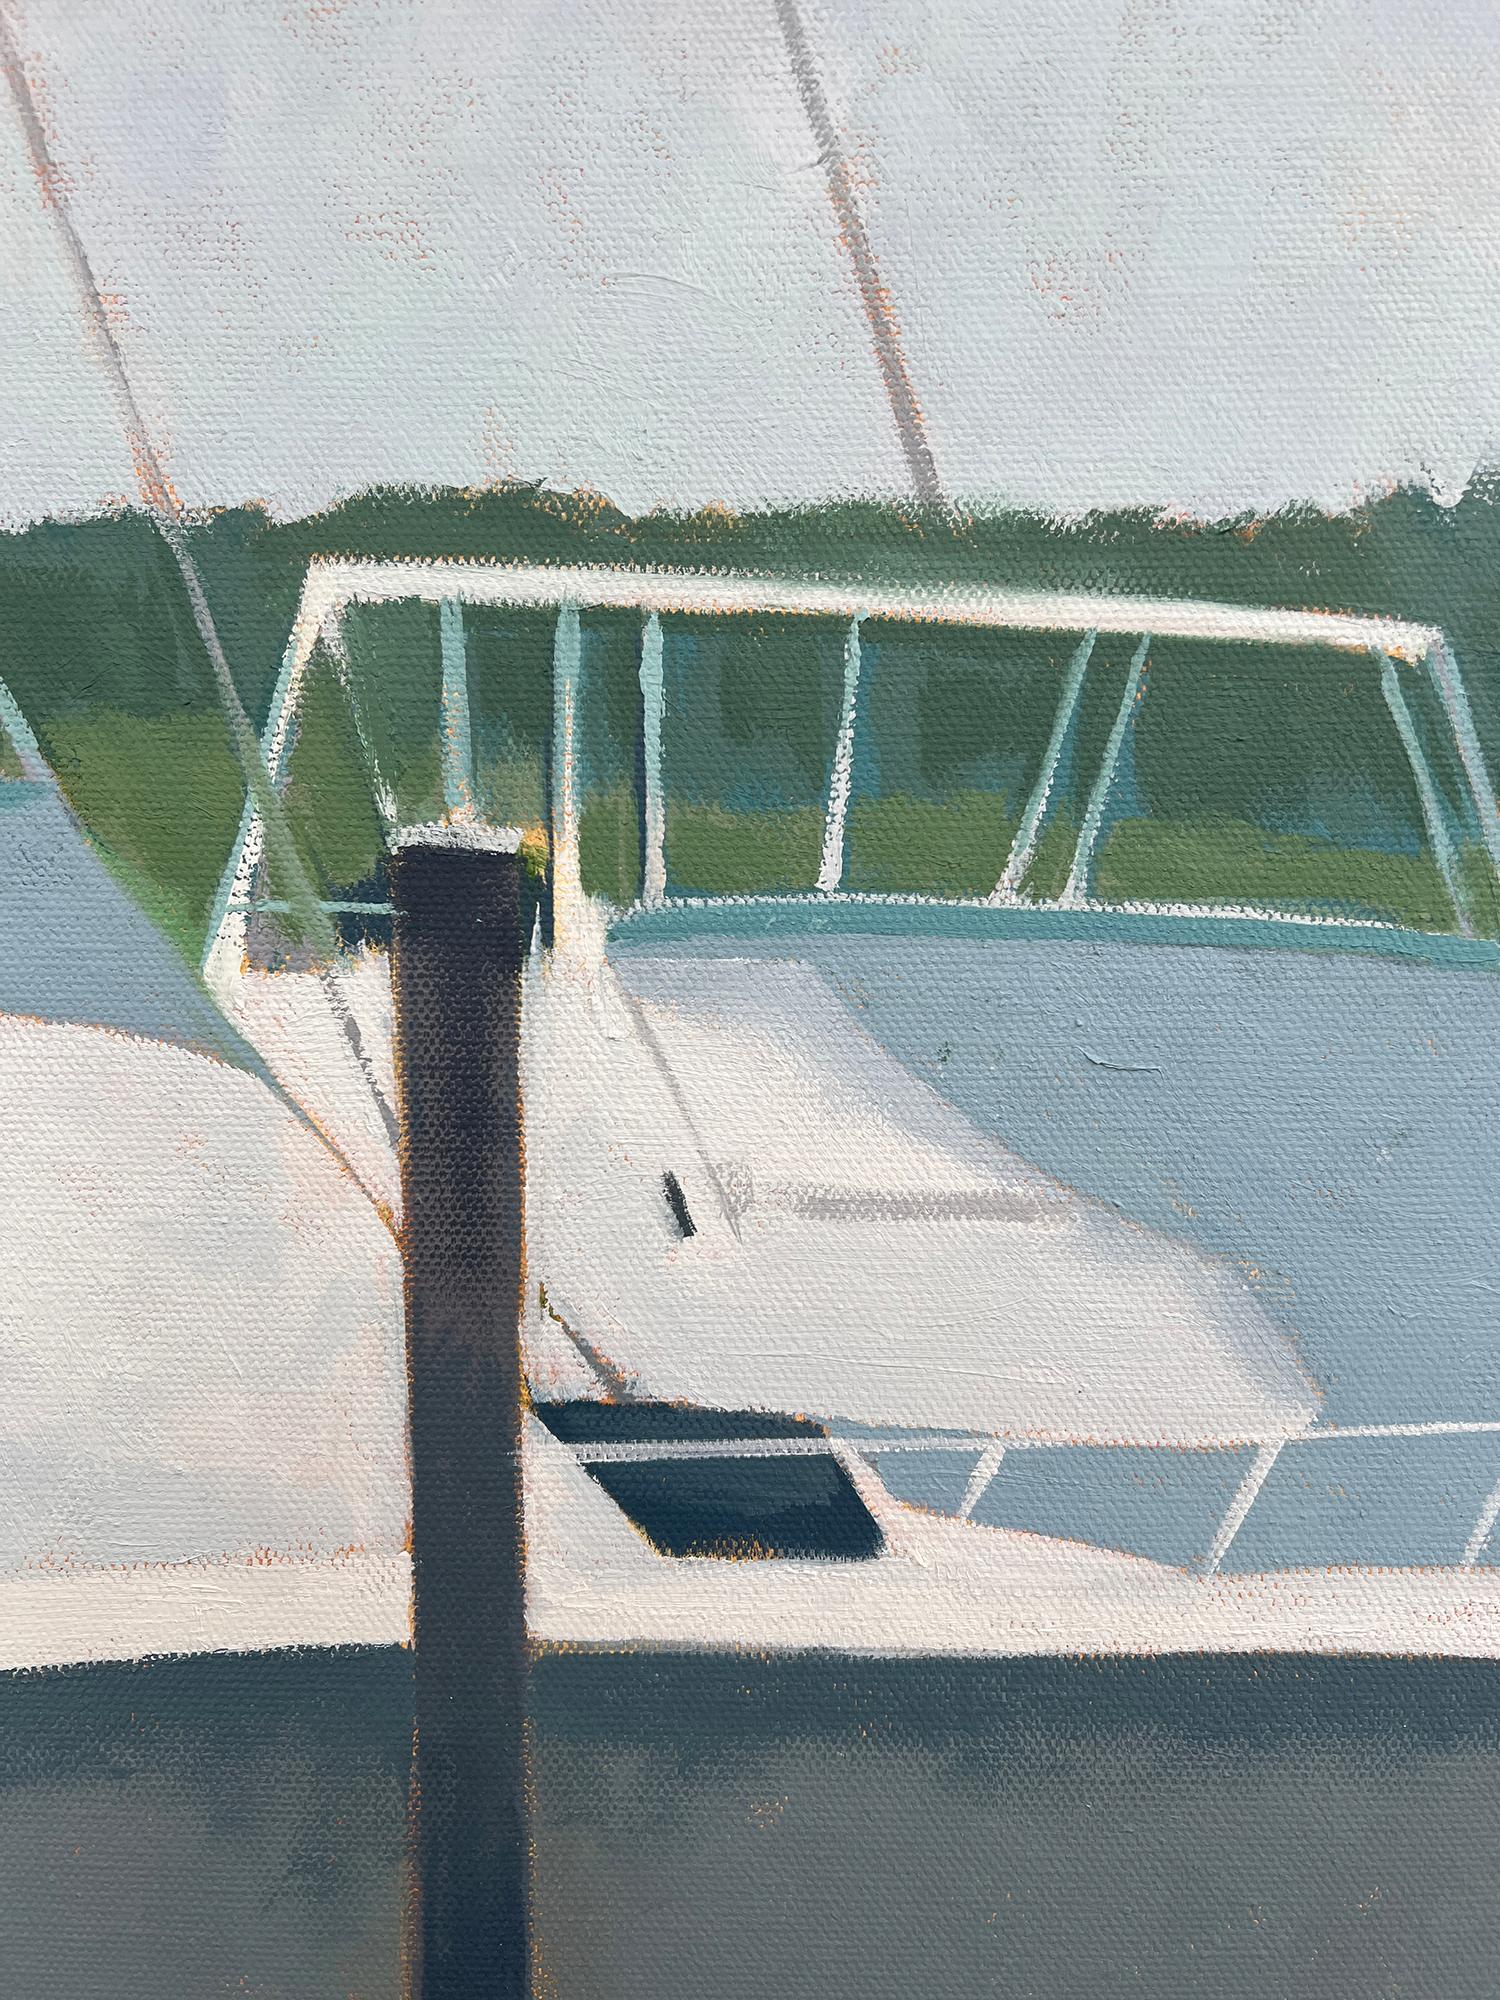 Boat Dock, Oil Painting 2